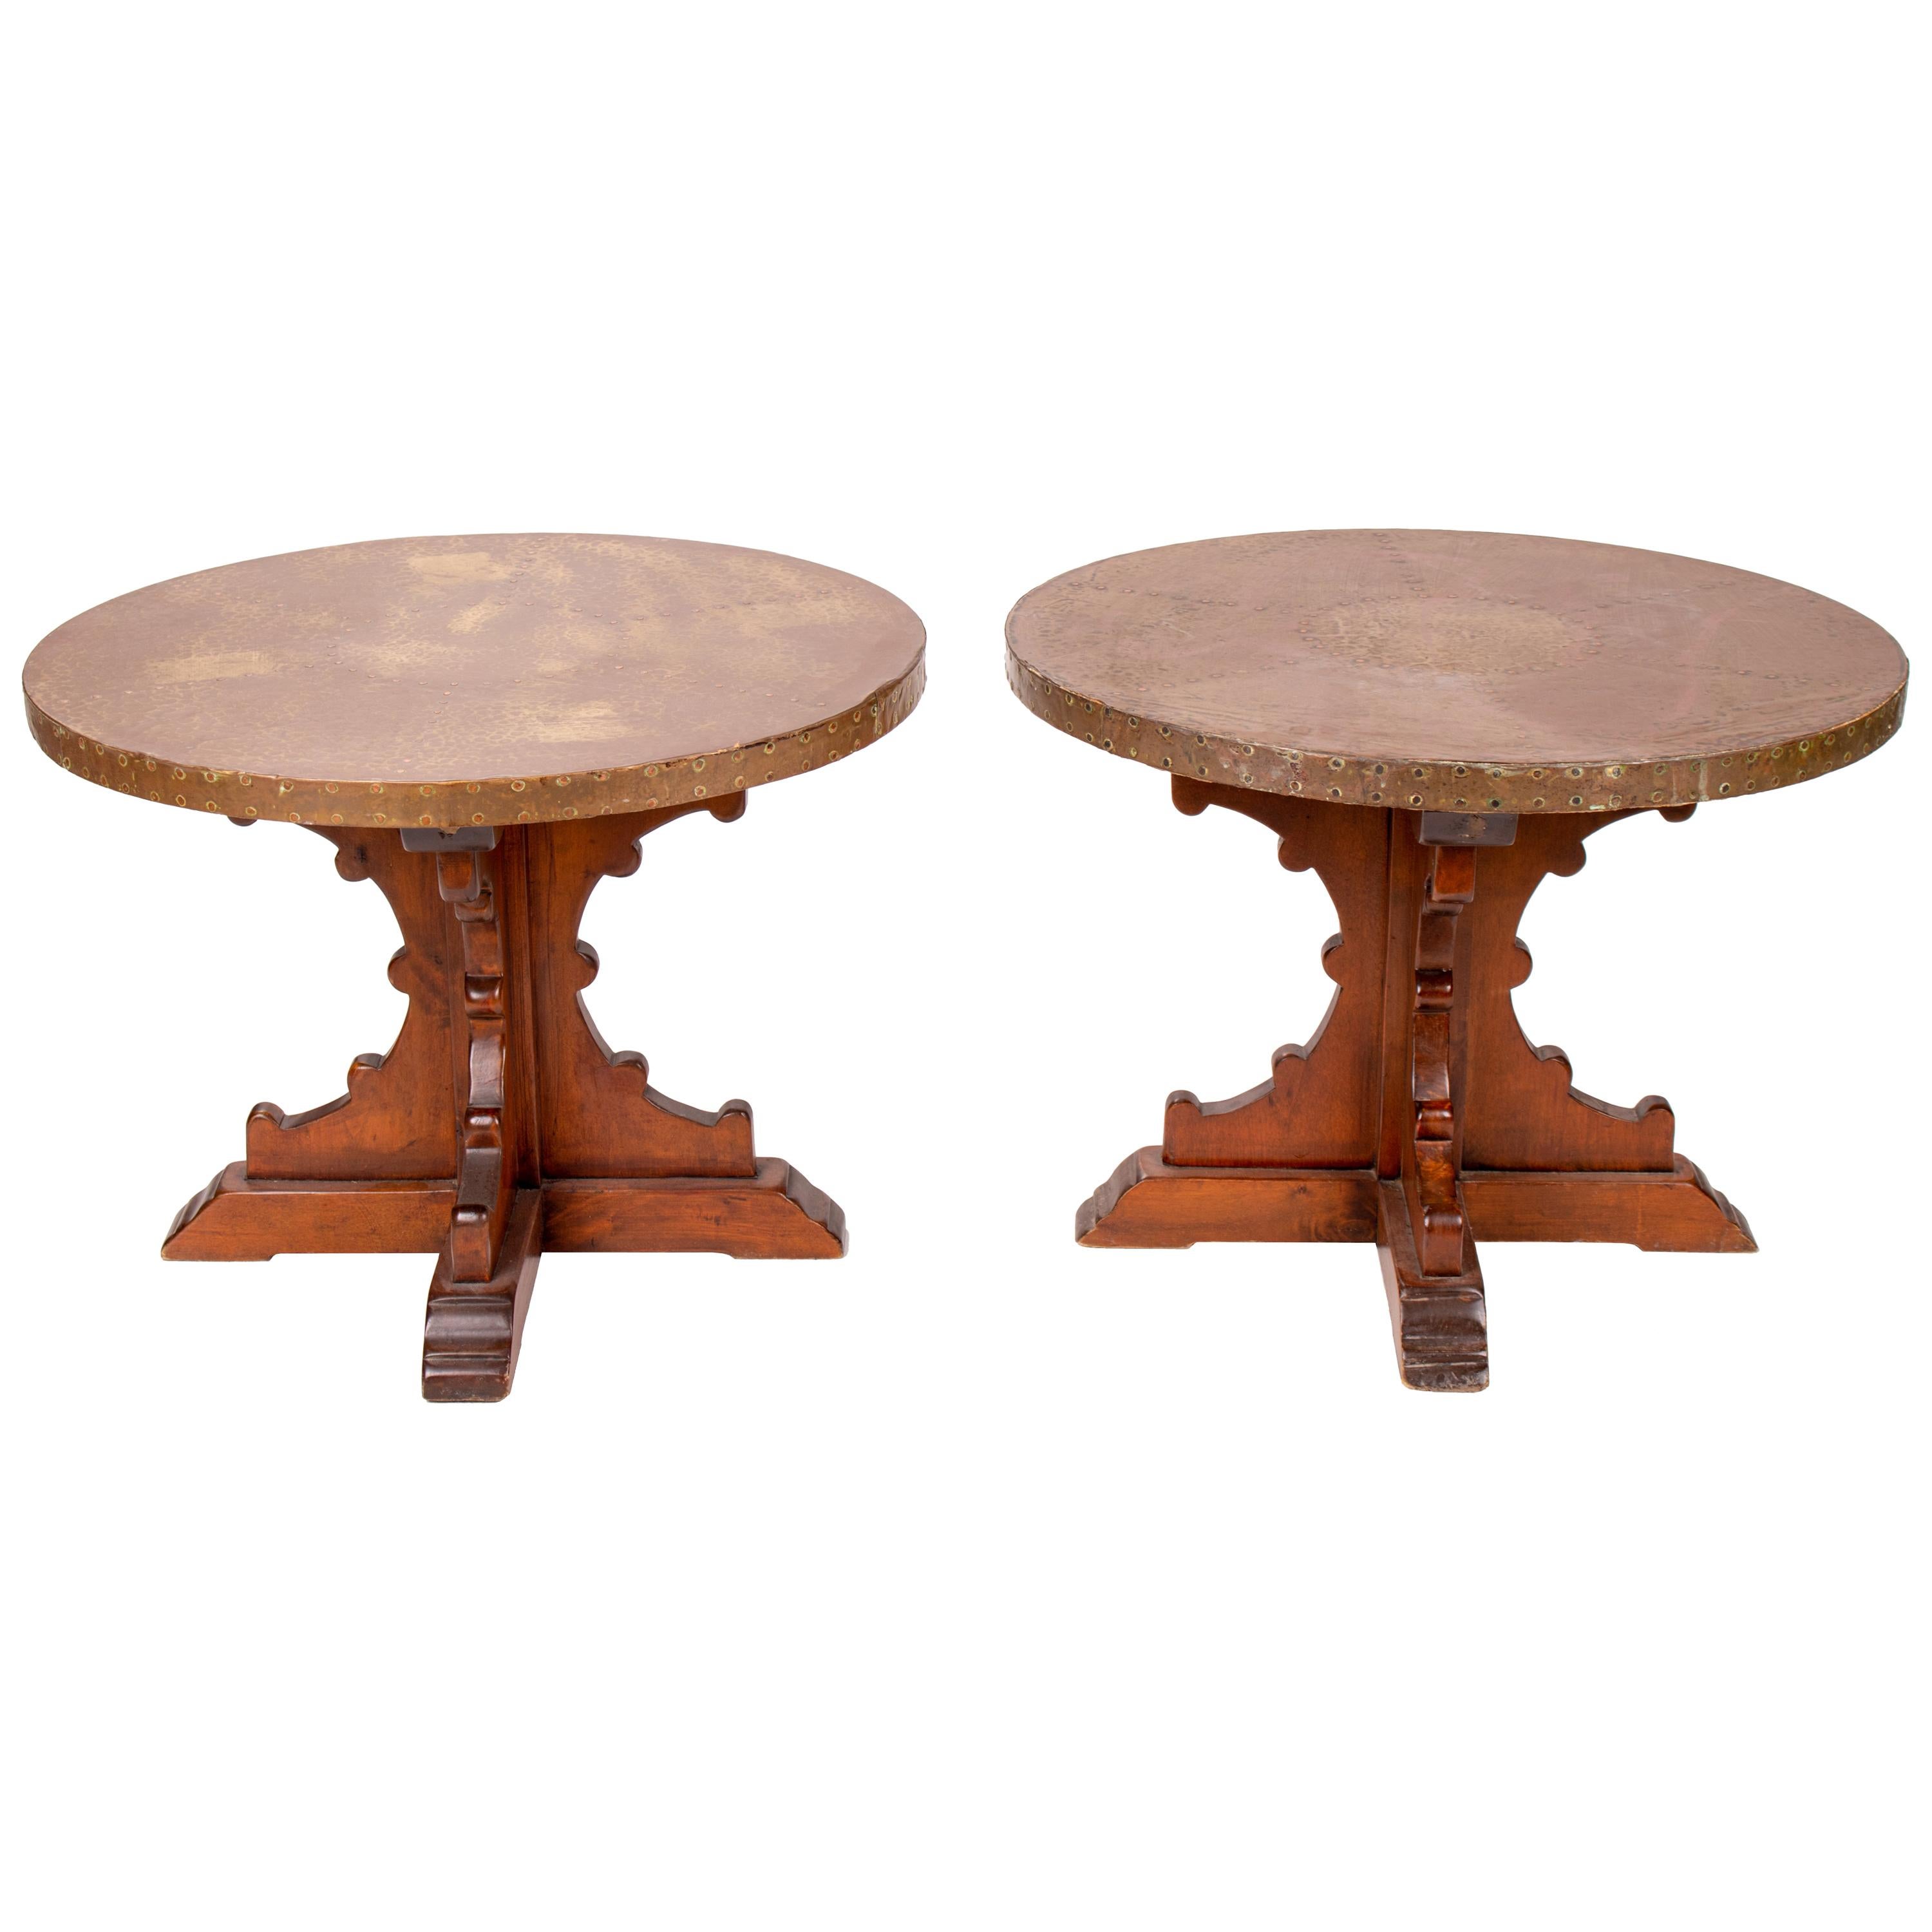 1970s Pair of French Brass Top Auxiliary Tables with Wooden Legs